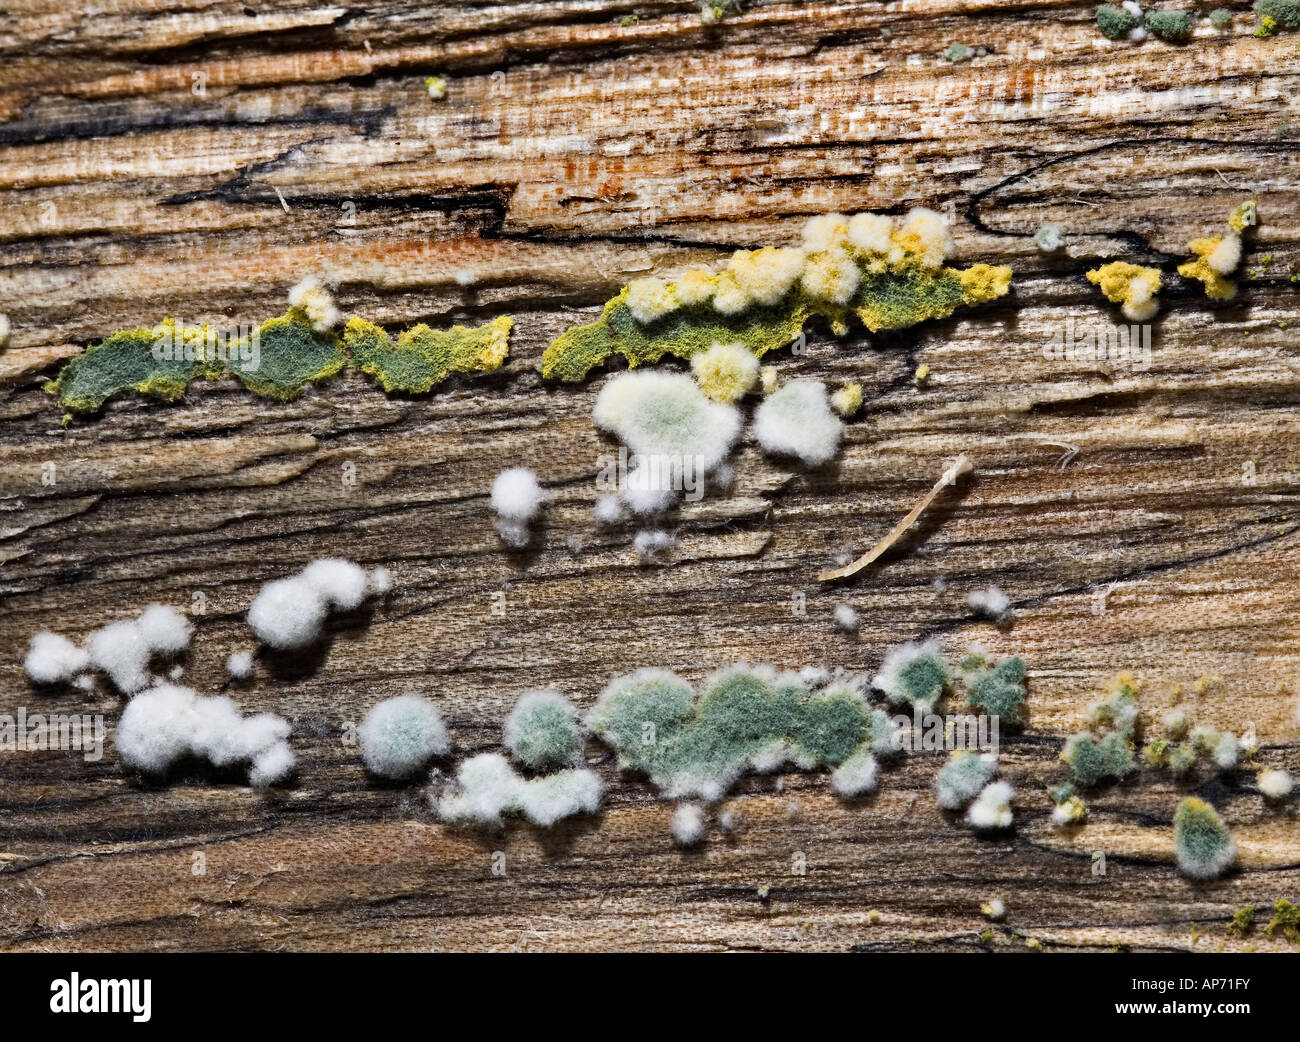 Rotting wood with mould and fungus growing UK Stock Photo